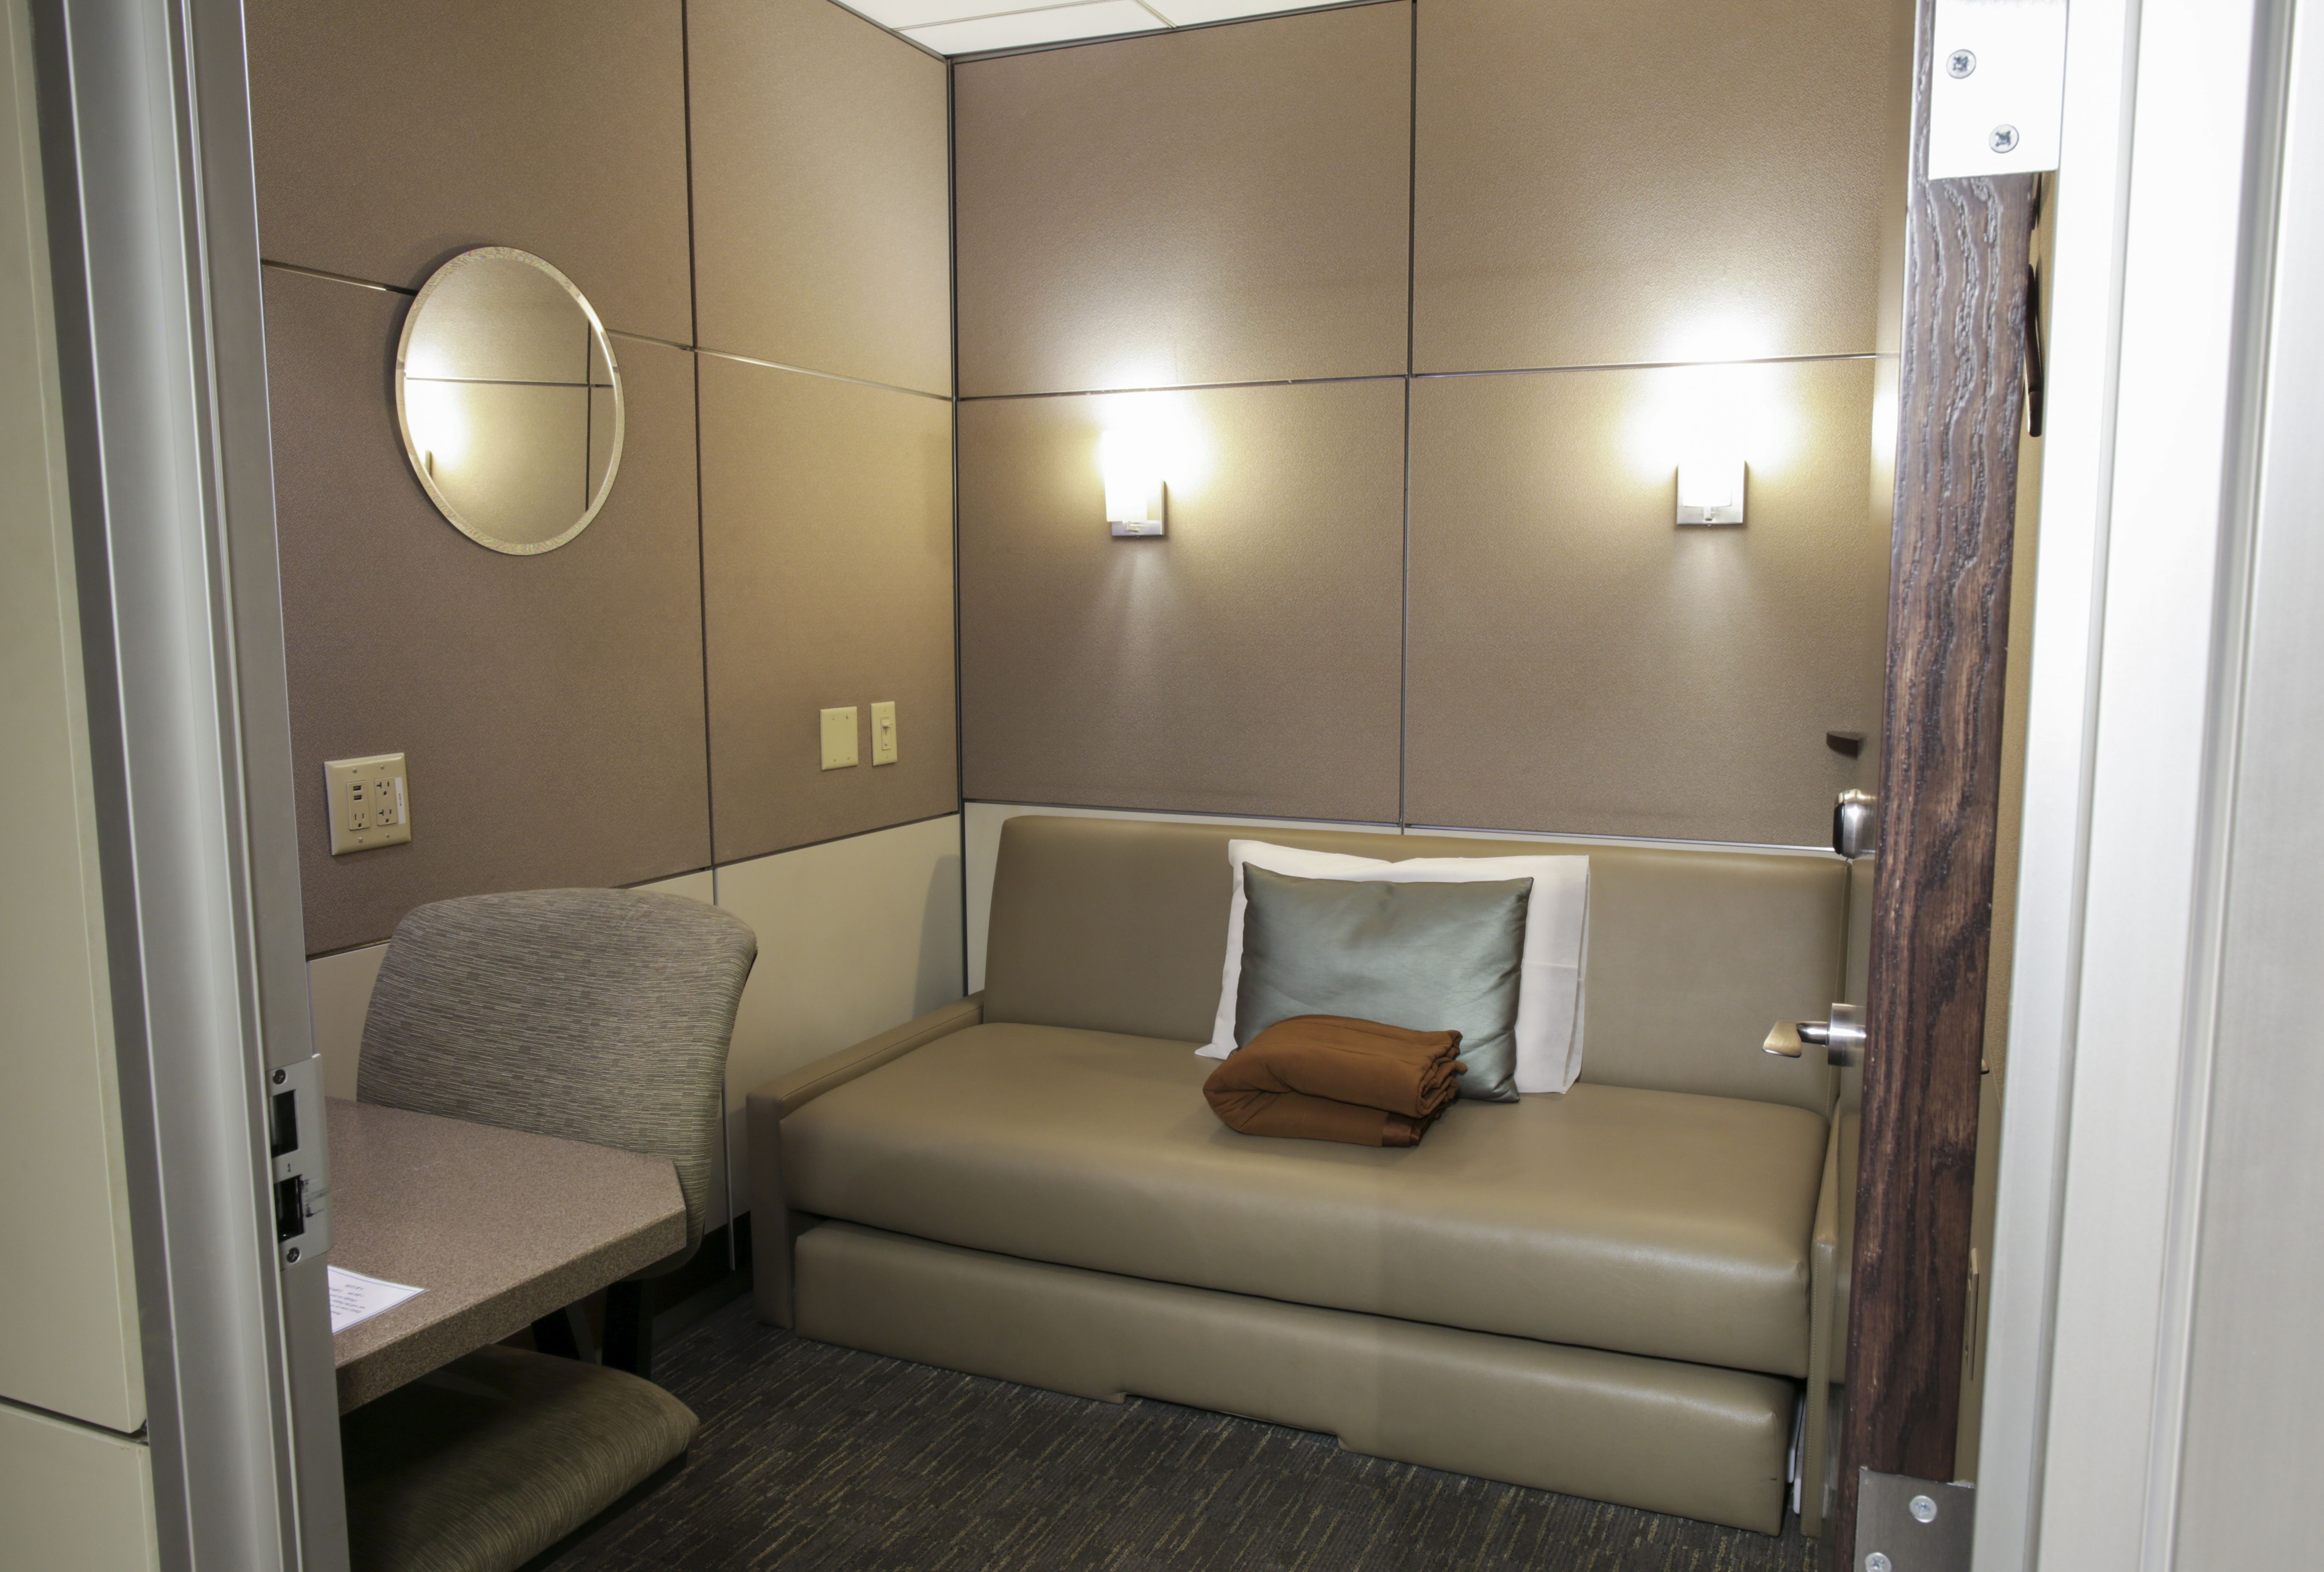 A beauty parlour and a gymnasium await at the Ambassador Transit Lounge in Singapore’s Changi Airport